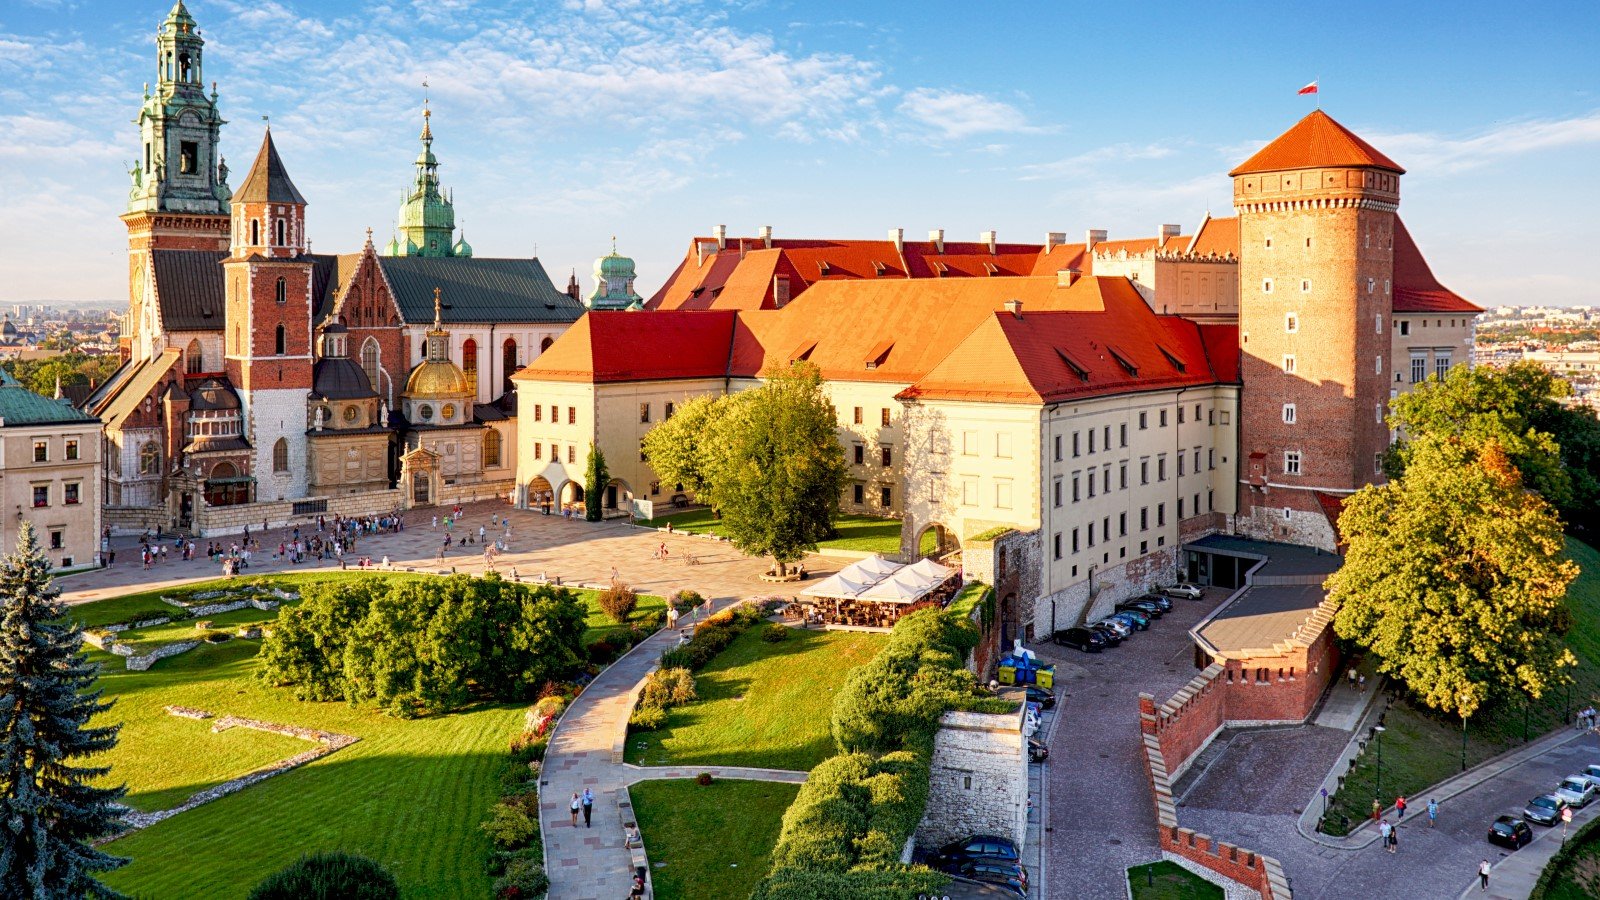 <p><span>Poland boasts two cities well worth a visit: Krakow and Warsaw. Krakow was voted the </span><span>European Capital of Culture in 2000</span><span>, while Warsaw is steeped in the history of World War Two. Warsaw is the </span><span>more expensive of the two</span><span> but is still affordable by European standards. </span></p>